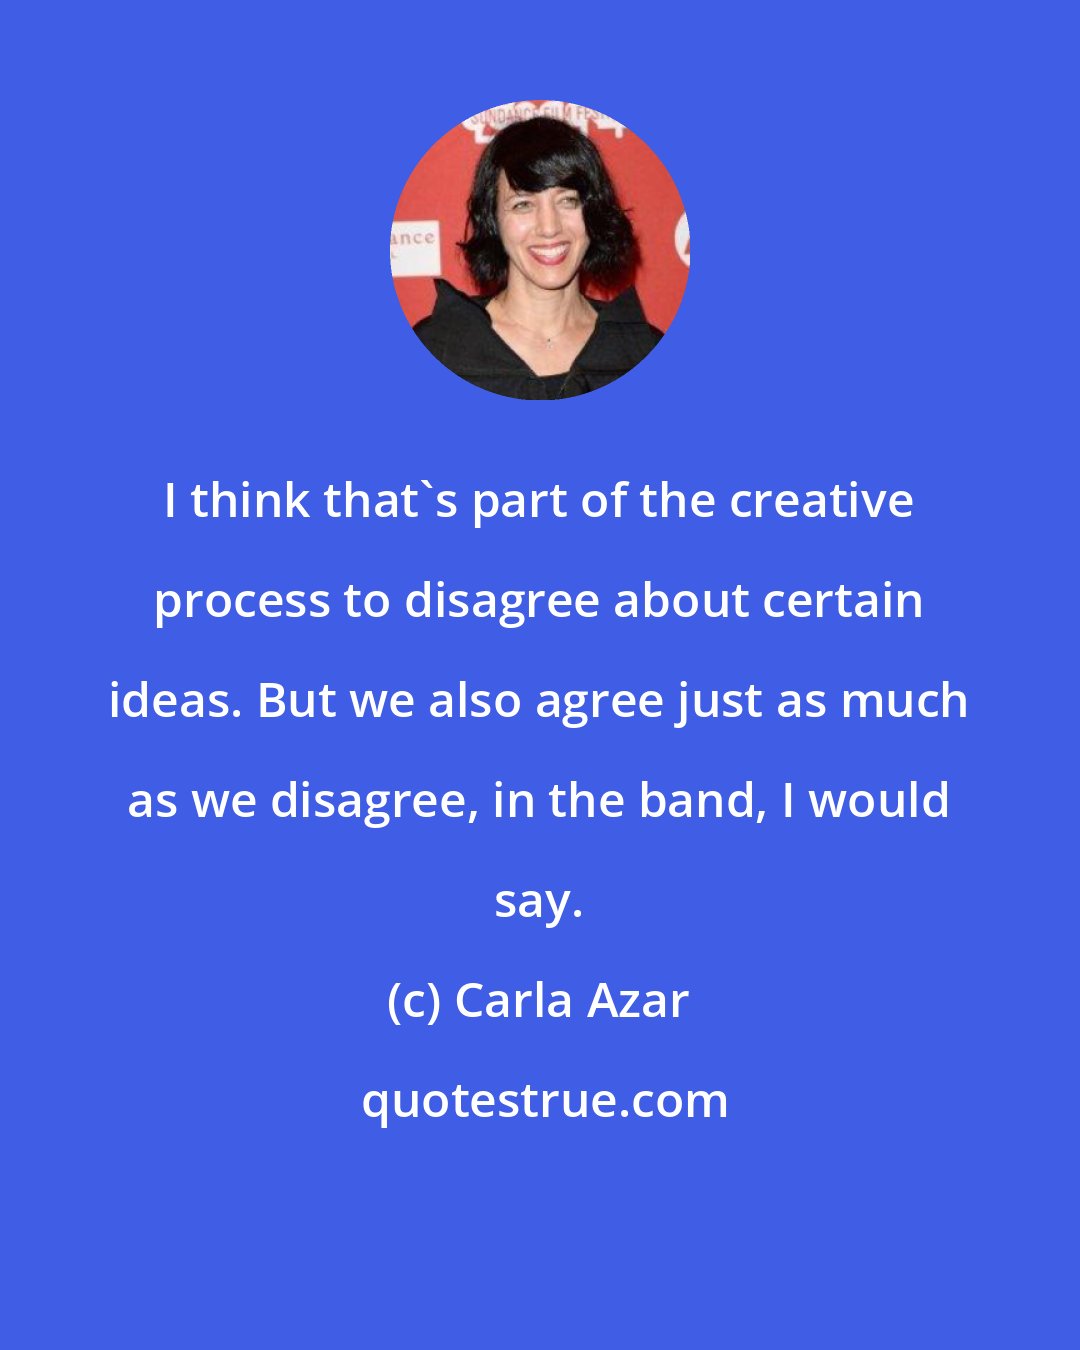 Carla Azar: I think that's part of the creative process to disagree about certain ideas. But we also agree just as much as we disagree, in the band, I would say.